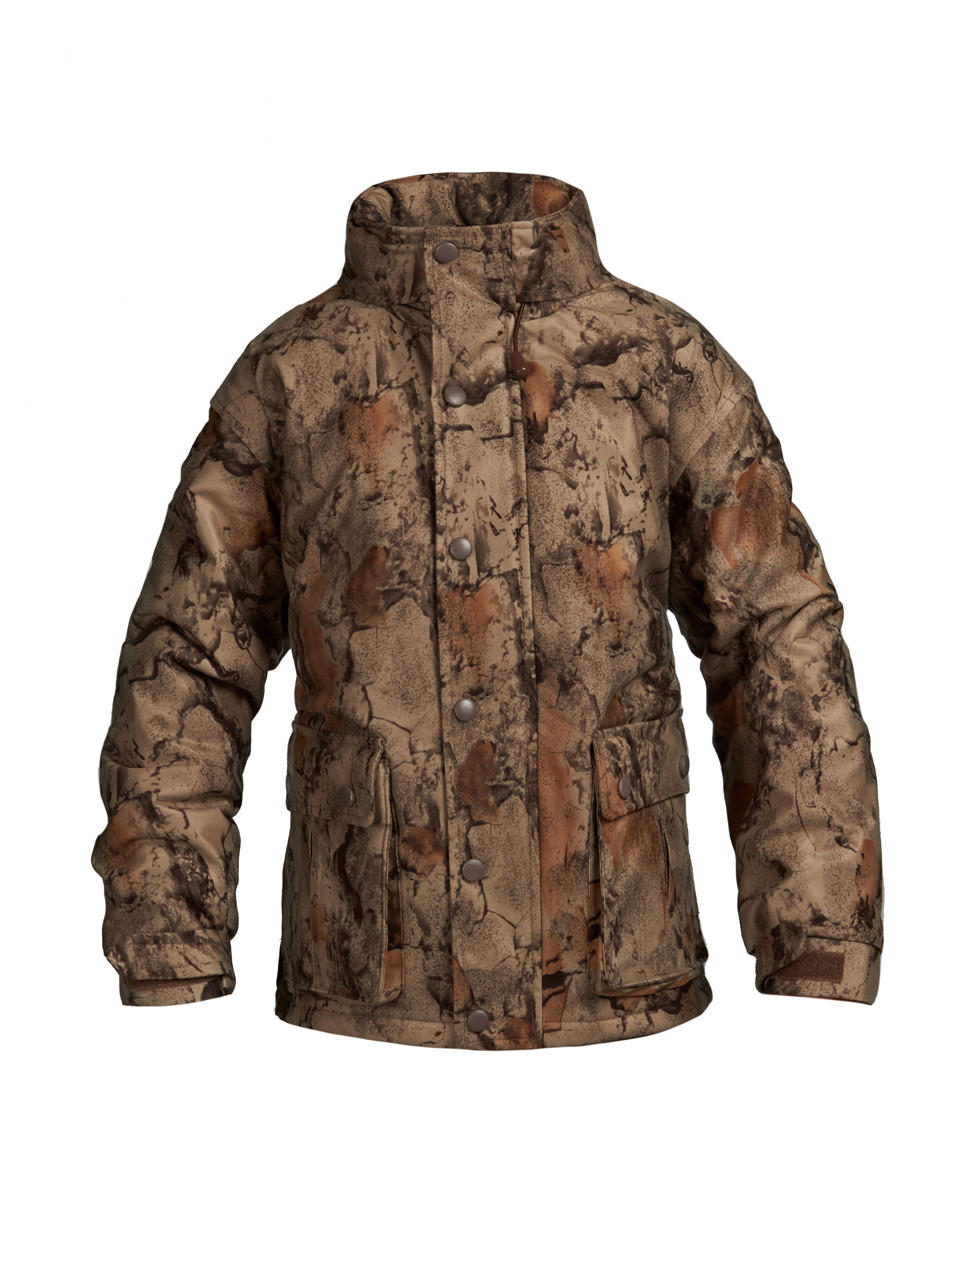 Youth Insulated Hunting Jacket - Natural Gear